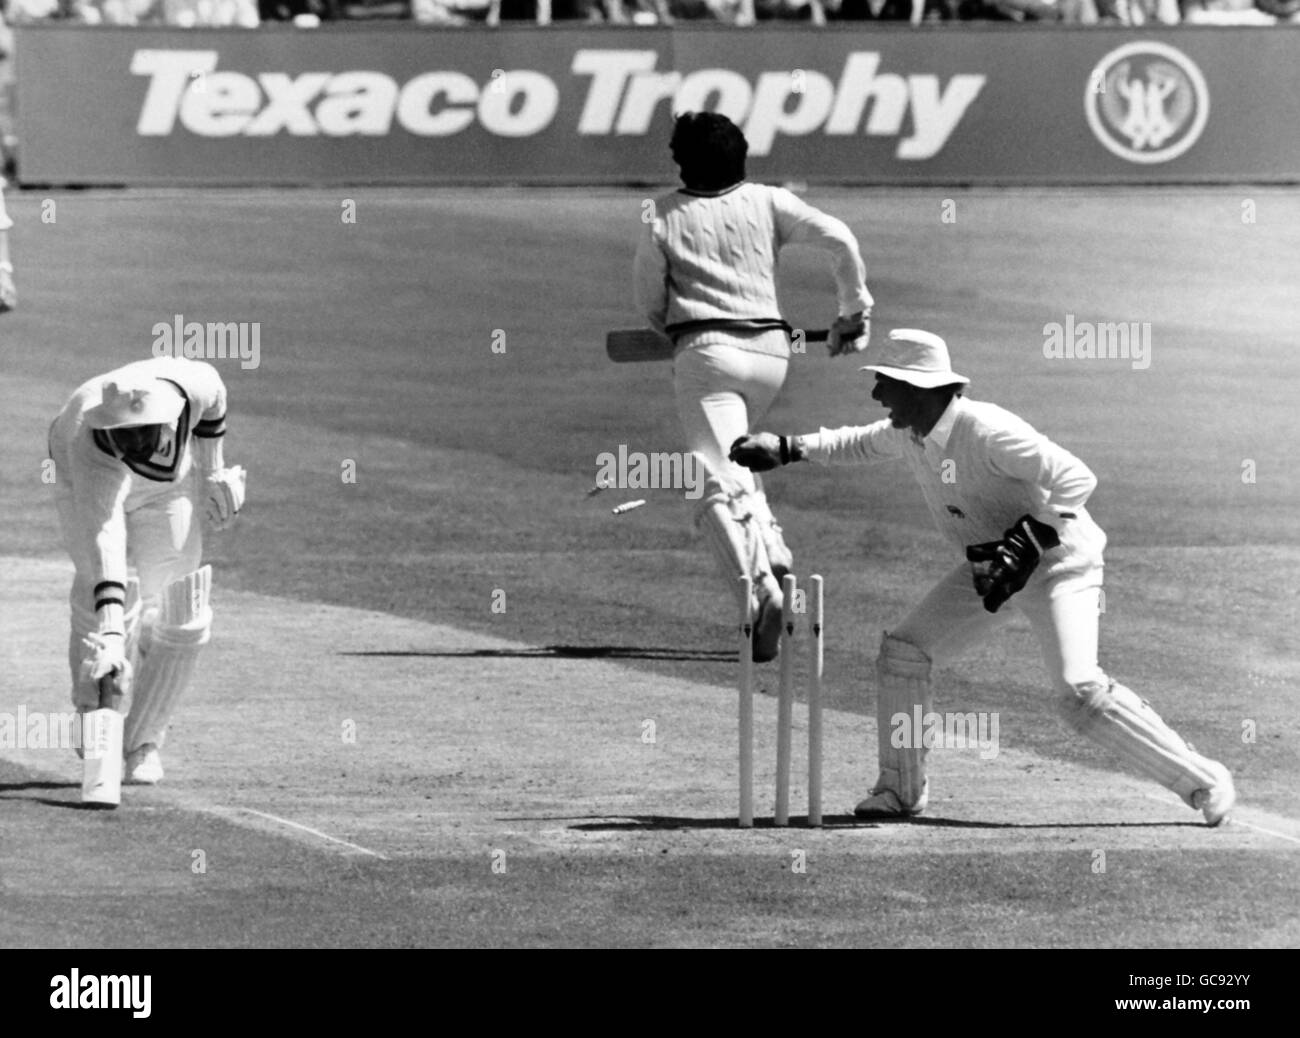 India batsman Sandeep Patil just makes it back to the crease in time as England wicket-keeper Paul Downton hits the bales from the wicket 26.5.86 Stock Photo